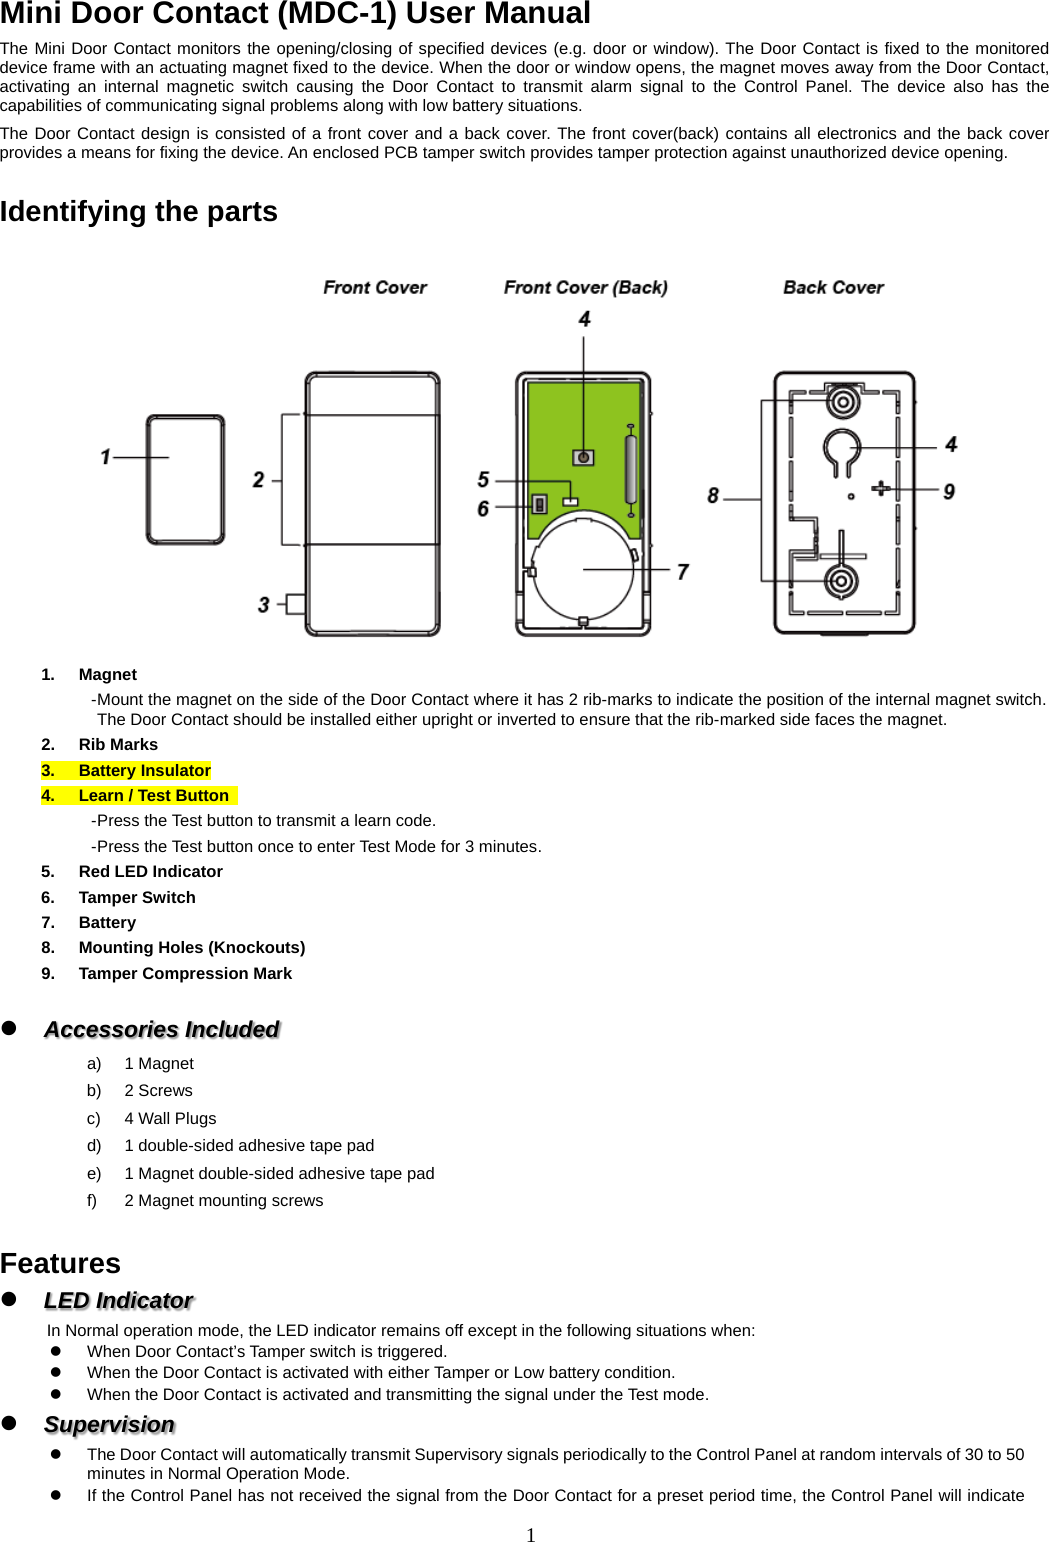 Mini Door Contact (MDC-1) User Manual The Mini Door Contact monitors the opening/closing of specified devices (e.g. door or window). The Door Contact is fixed to the monitored device frame with an actuating magnet fixed to the device. When the door or window opens, the magnet moves away from the Door Contact, activating an internal magnetic switch causing the Door Contact to transmit alarm signal to the Control Panel. The device also has the capabilities of communicating signal problems along with low battery situations. The Door Contact design is consisted of a front cover and a back cover. The front cover(back) contains all electronics and the back cover provides a means for fixing the device. An enclosed PCB tamper switch provides tamper protection against unauthorized device opening.  Identifying the parts  1.  Magnet - Mount the magnet on the side of the Door Contact where it has 2 rib-marks to indicate the position of the internal magnet switch. The Door Contact should be installed either upright or inverted to ensure that the rib-marked side faces the magnet. 2.  Rib Marks 3.  Battery Insulator 4.  Learn / Test Button   - Press the Test button to transmit a learn code. - Press the Test button once to enter Test Mode for 3 minutes. 5.  Red LED Indicator 6.  Tamper Switch 7.  Battery 8.  Mounting Holes (Knockouts) 9.  Tamper Compression Mark   Accessories Included a)  1 Magnet b)  2 Screws c)  4 Wall Plugs d)  1 double-sided adhesive tape pad e)  1 Magnet double-sided adhesive tape pad f)  2 Magnet mounting screws  Features  LED Indicator     In Normal operation mode, the LED indicator remains off except in the following situations when:   When Door Contact’s Tamper switch is triggered.   When the Door Contact is activated with either Tamper or Low battery condition.   When the Door Contact is activated and transmitting the signal under the Test mode.  Supervision     The Door Contact will automatically transmit Supervisory signals periodically to the Control Panel at random intervals of 30 to 50 minutes in Normal Operation Mode.  If the Control Panel has not received the signal from the Door Contact for a preset period time, the Control Panel will indicate 1  